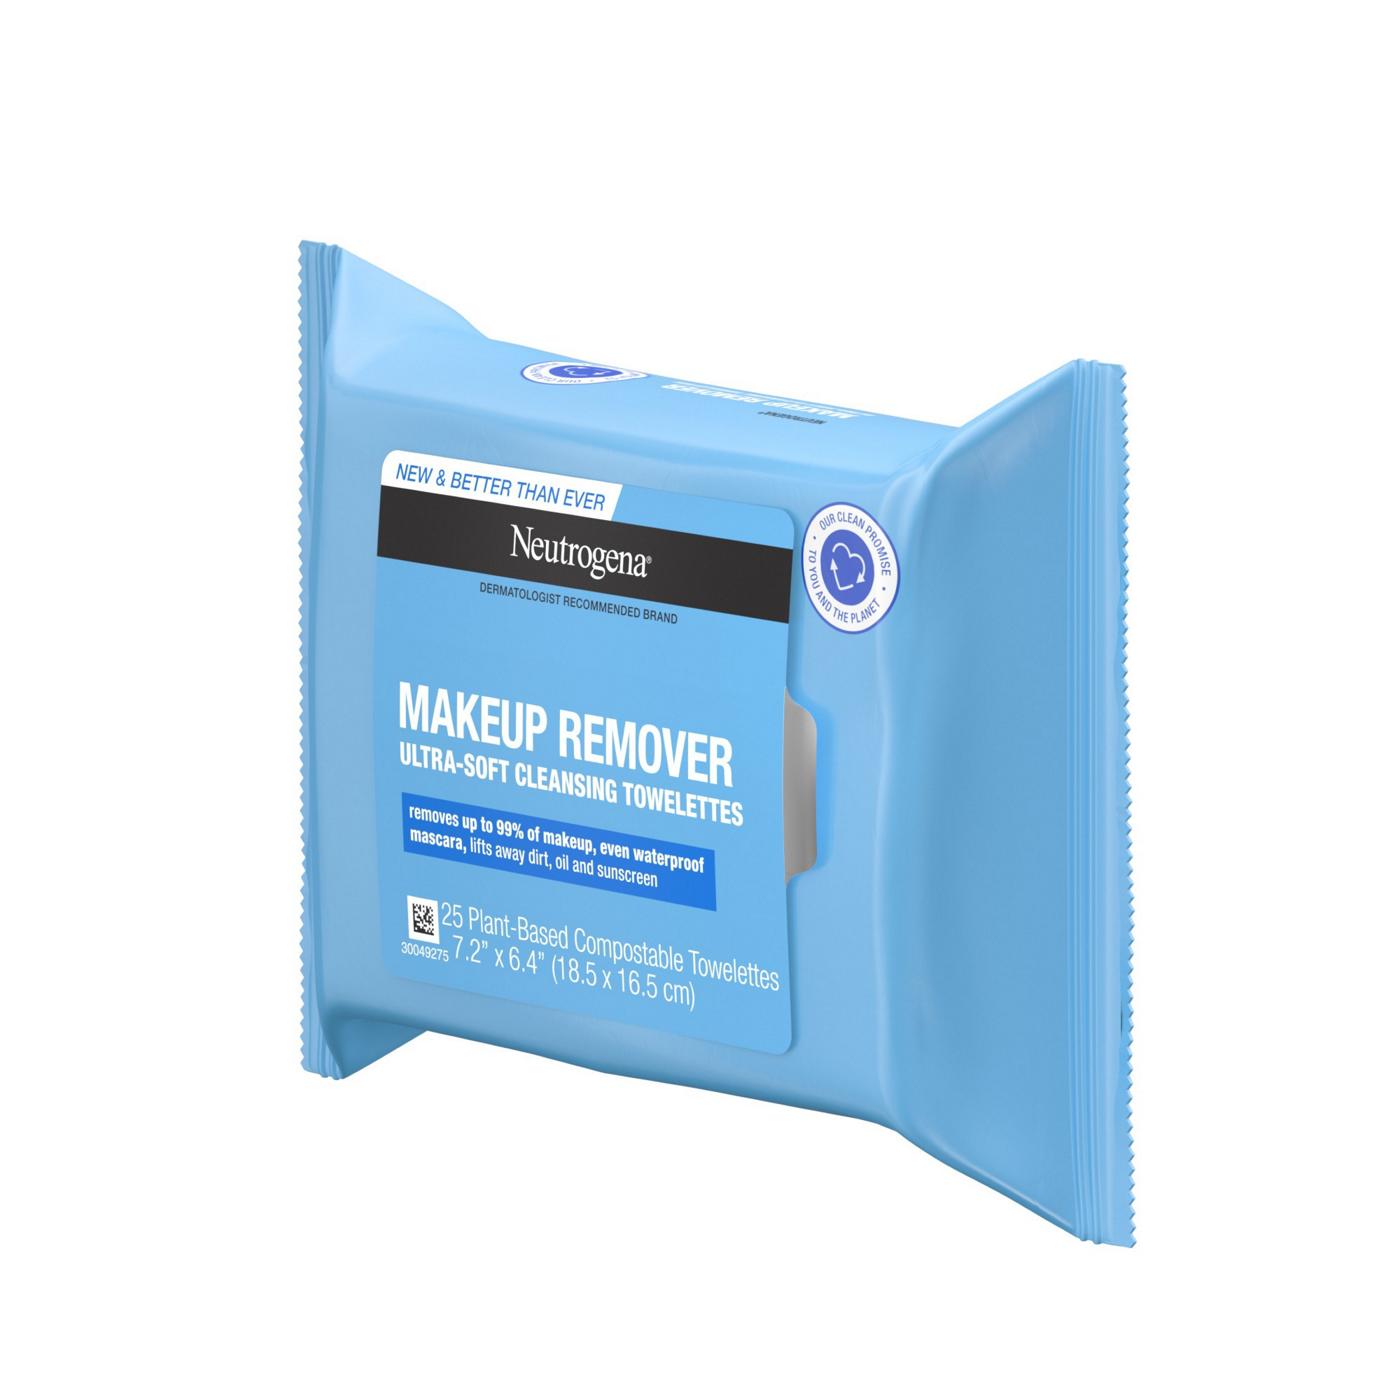 Neutrogena Makeup Remover Cleansing Towelettes; image 4 of 8